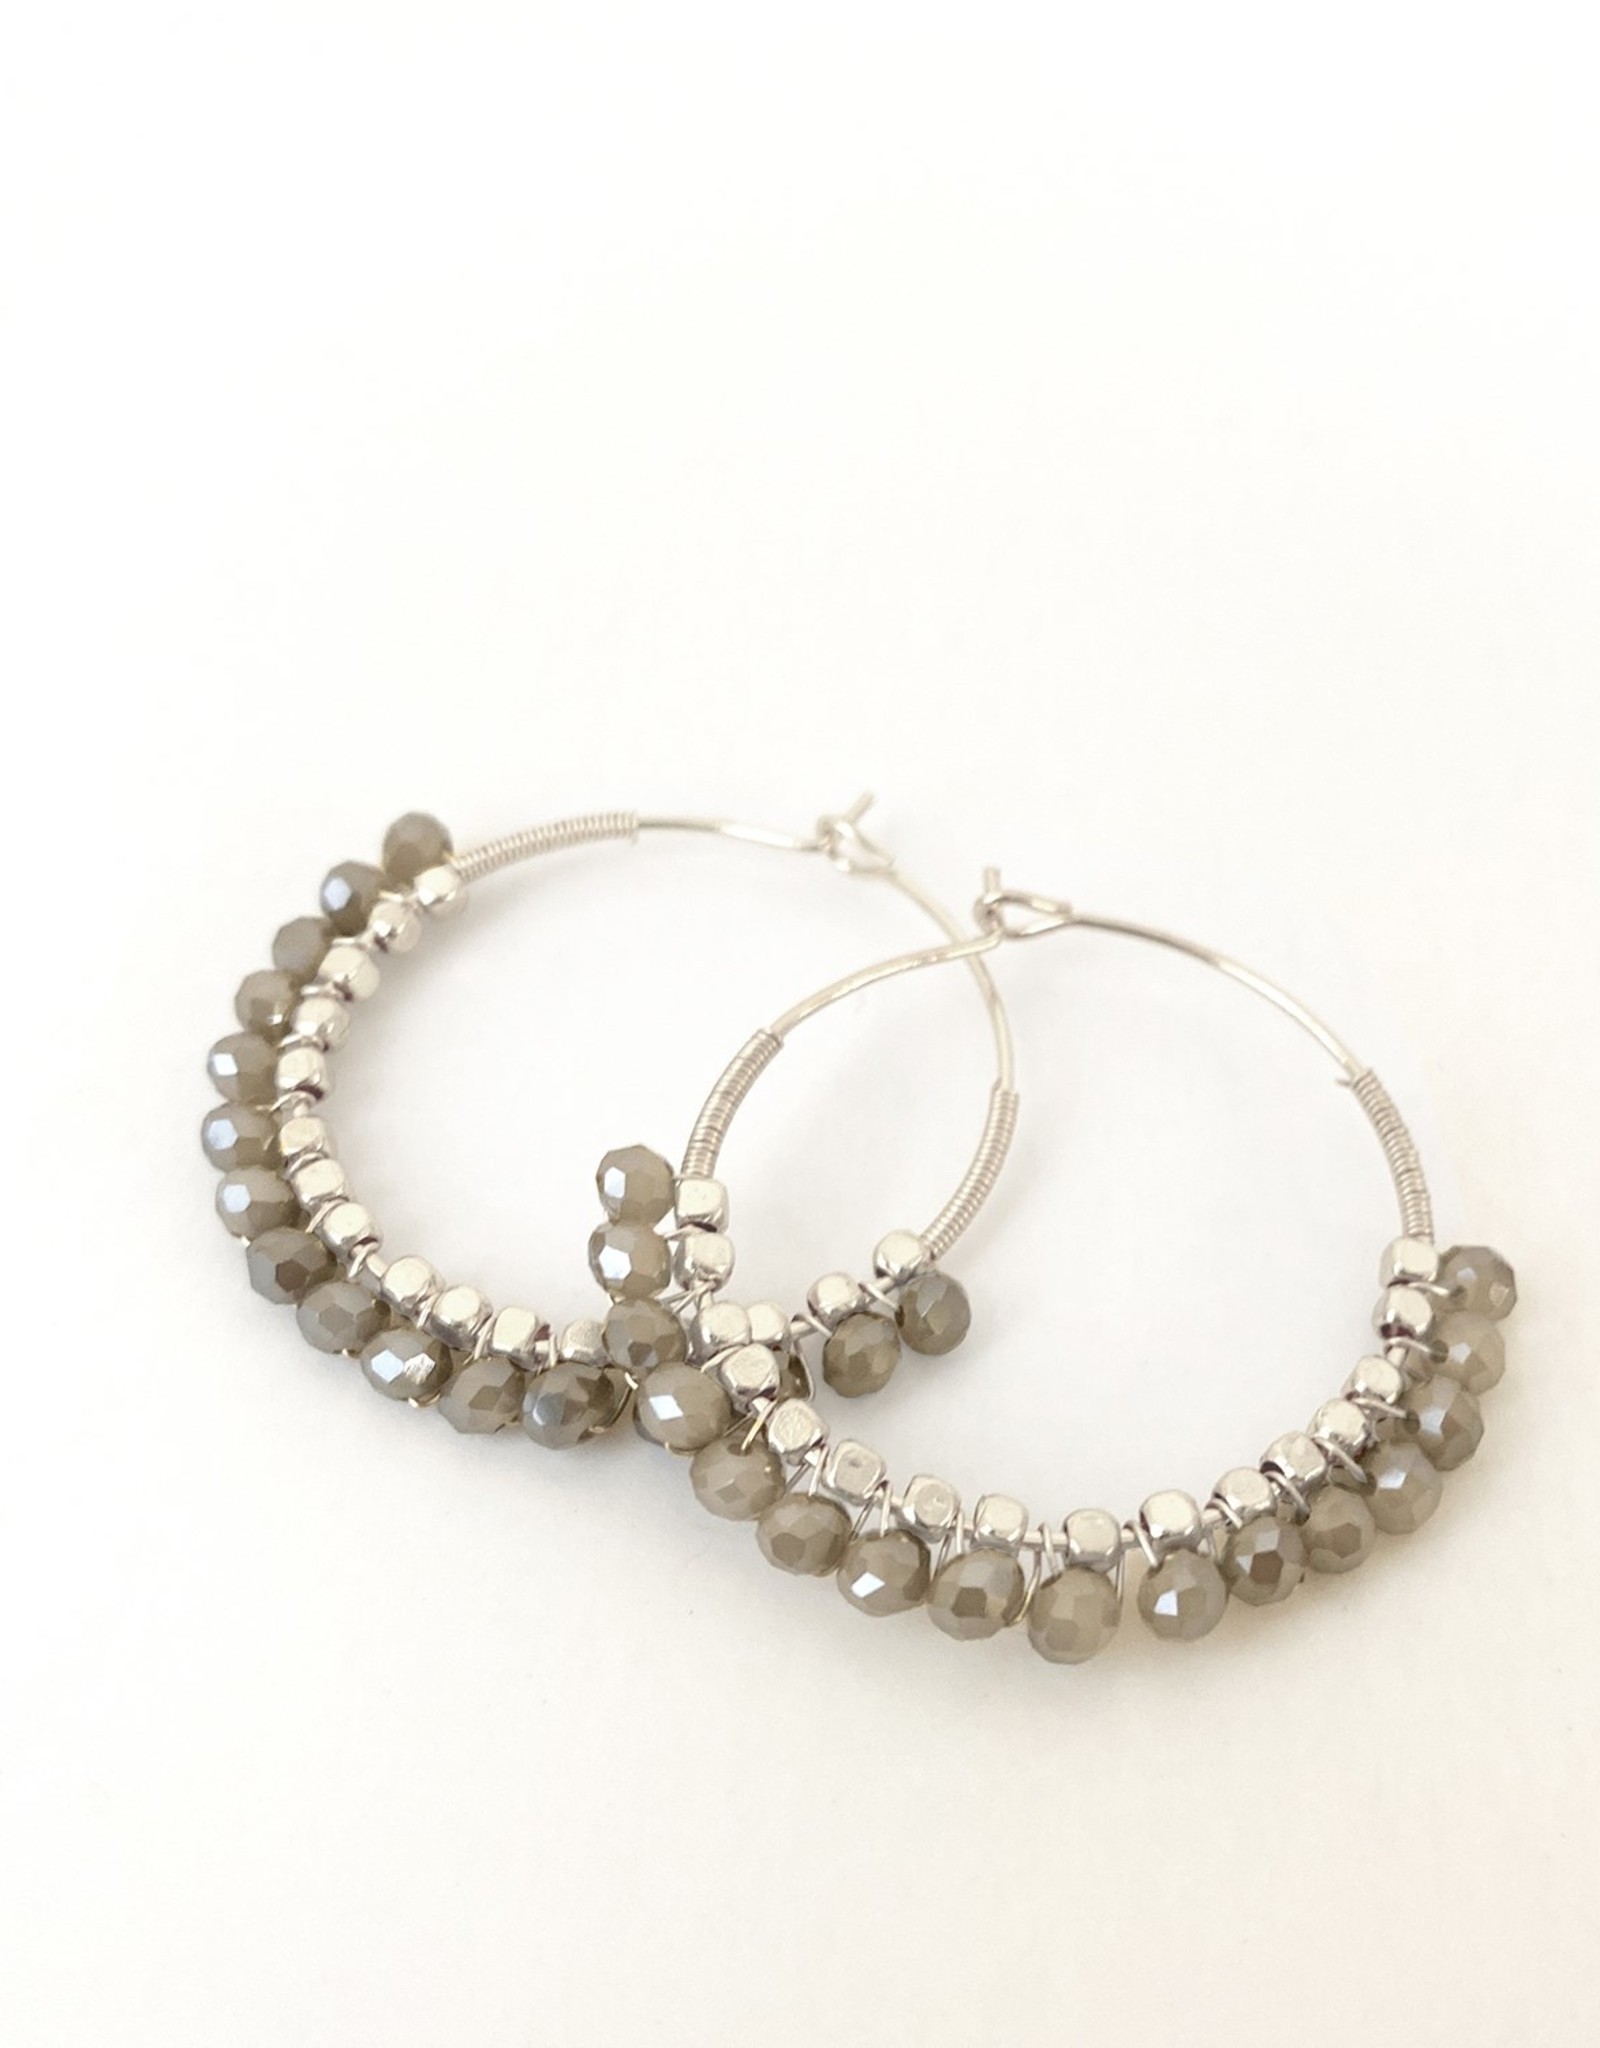 Grey & Silver Hoops with Mini Glass Beads